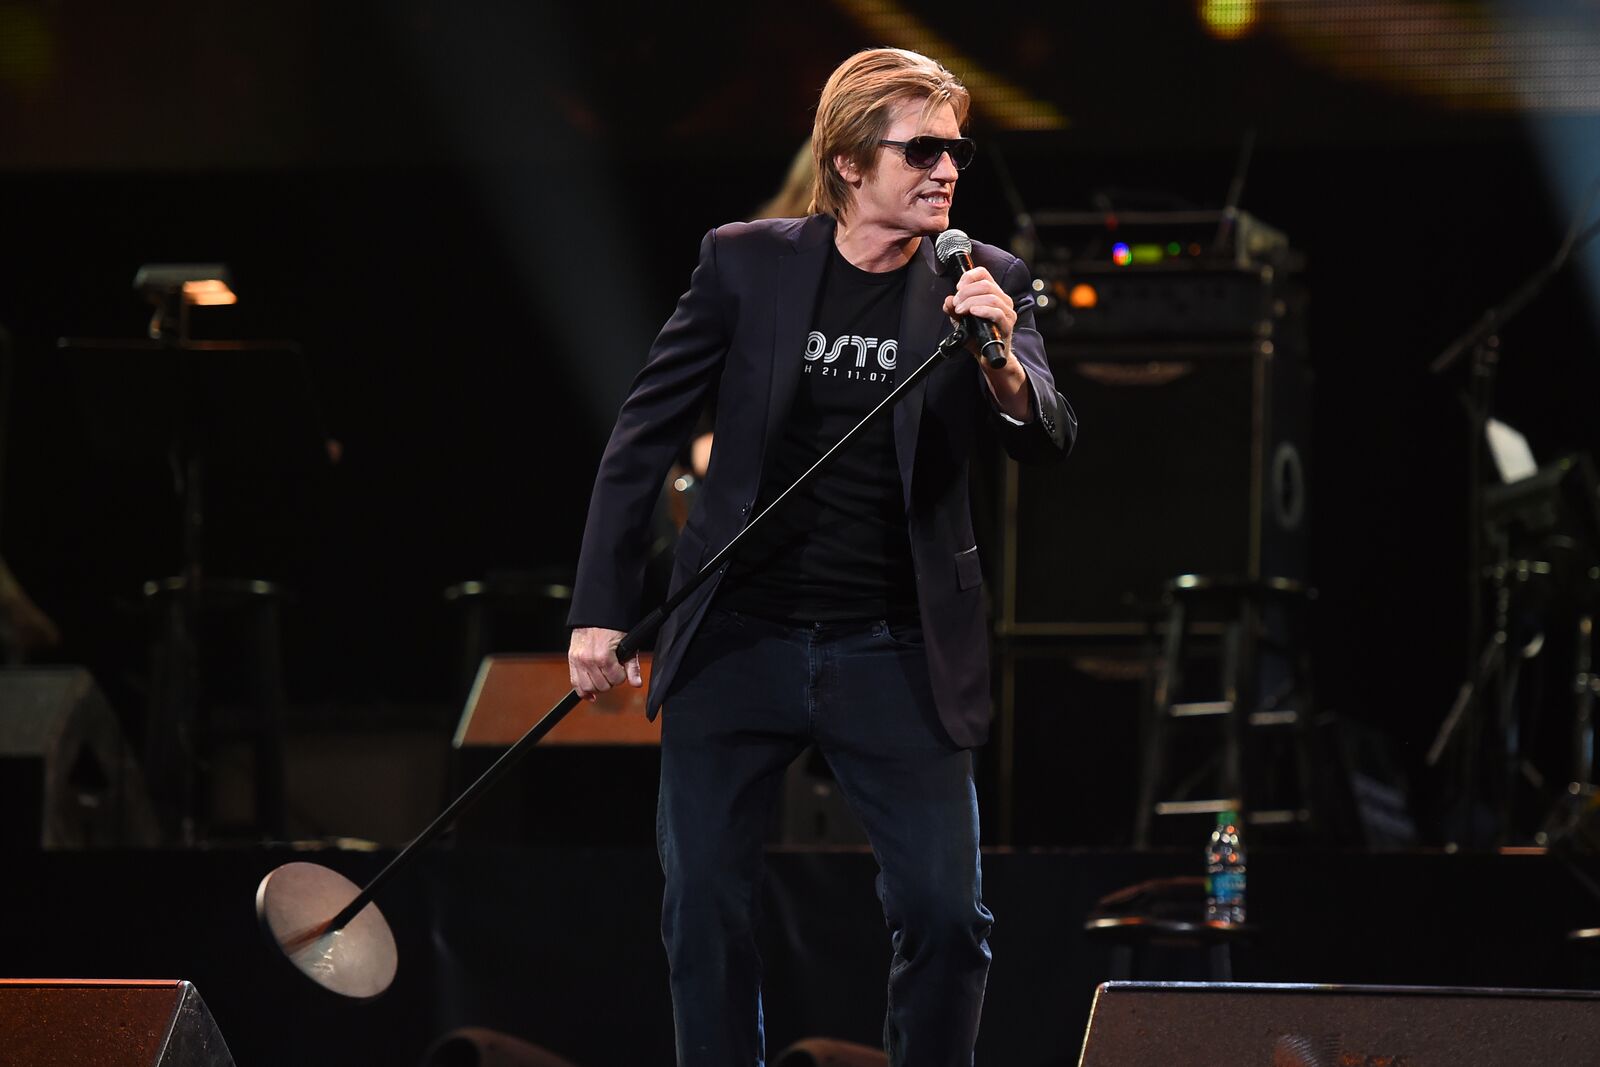 Denis Leary at the 2015 Comics Come Home